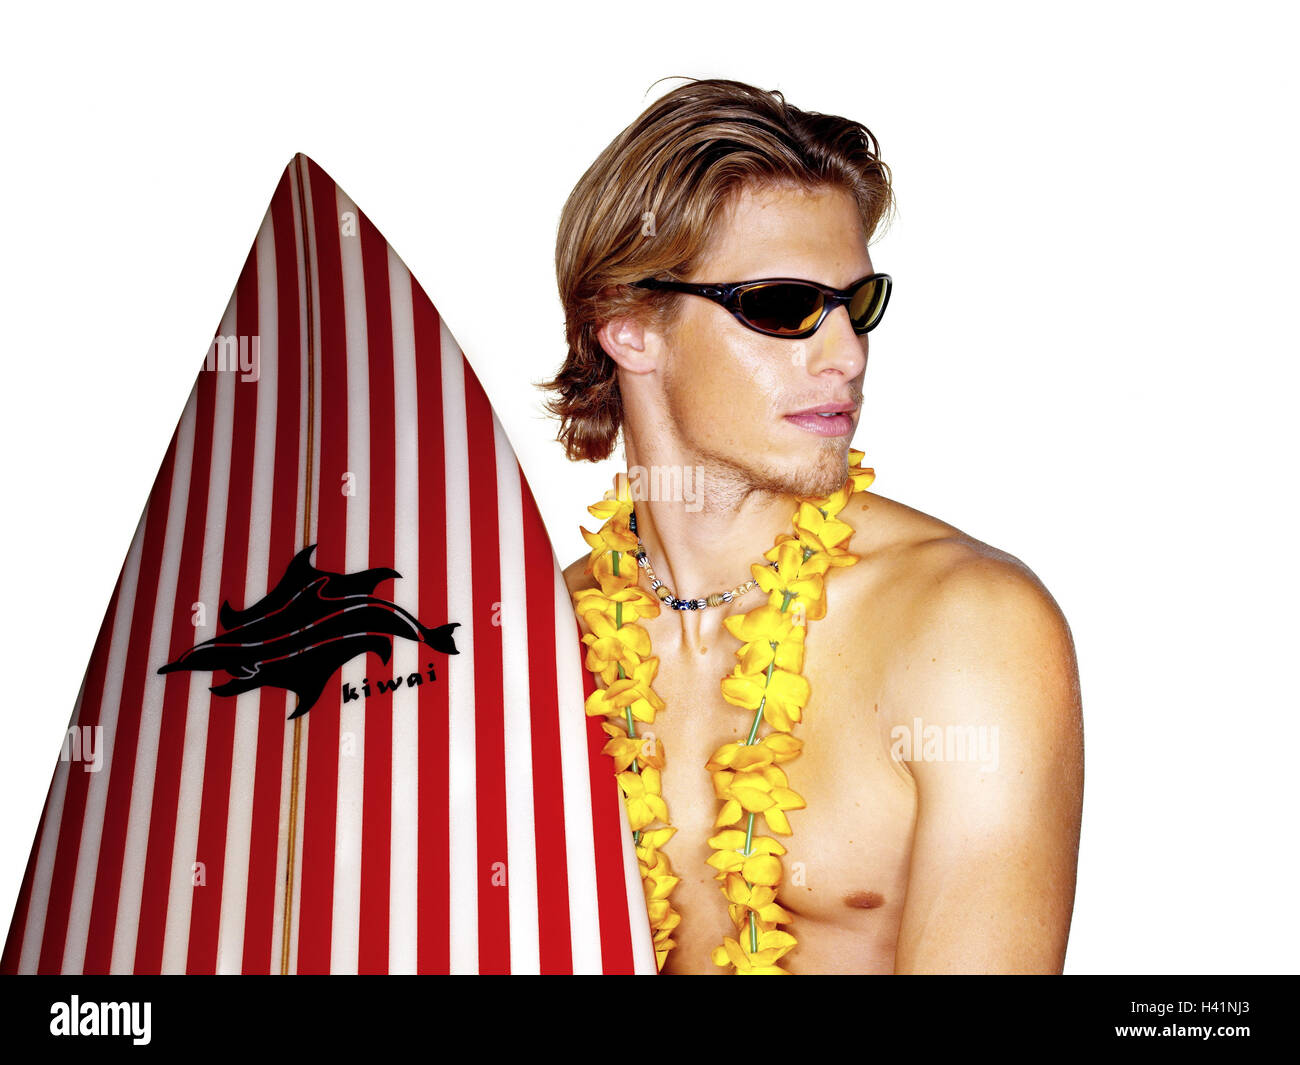 Man, young, sunglasses, floral wreath, surfboard, portrait, icon, vacation, summer vacation, leisure time, rest, sport, water sport, wave bleed, surfer, blond, necklace, free upper part of the body, glasses, side glance, view side view, flower rim artific Stock Photo